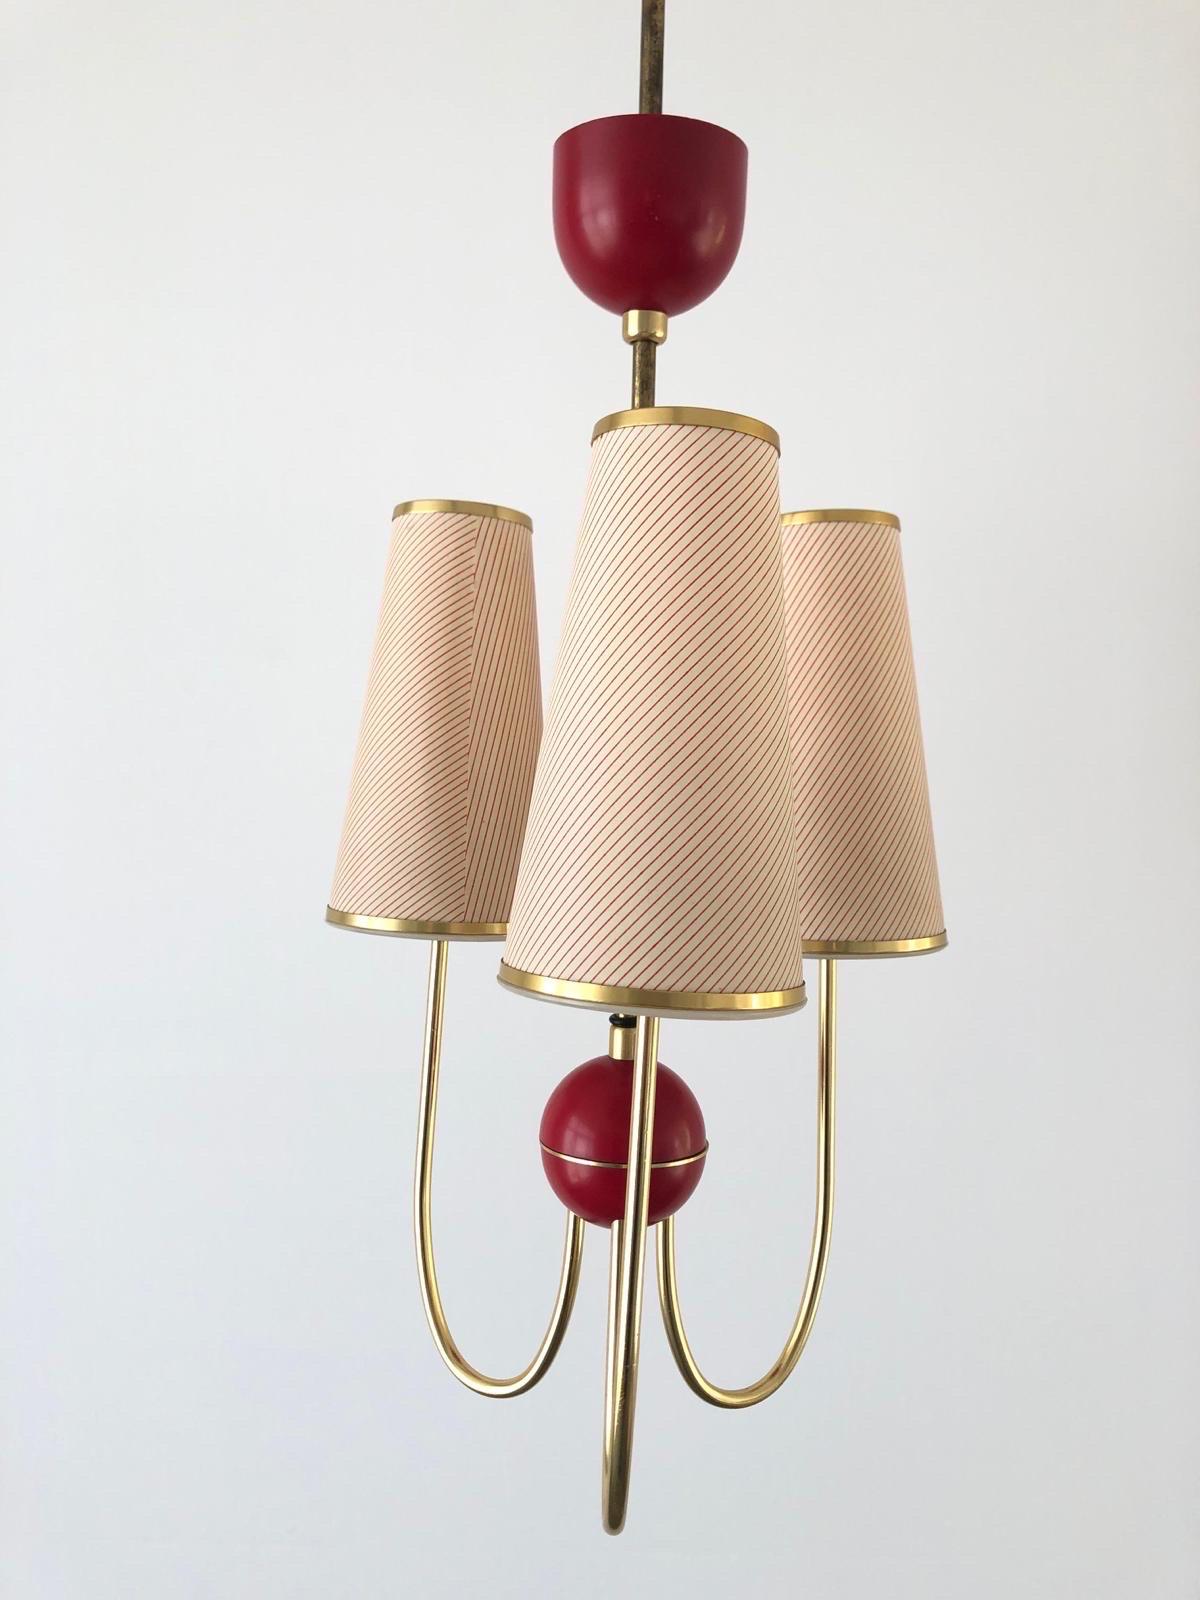 3-armed Fabric and Plastic Sputnik Pendant Lamp by Erco, 1950s, Germany For Sale 6